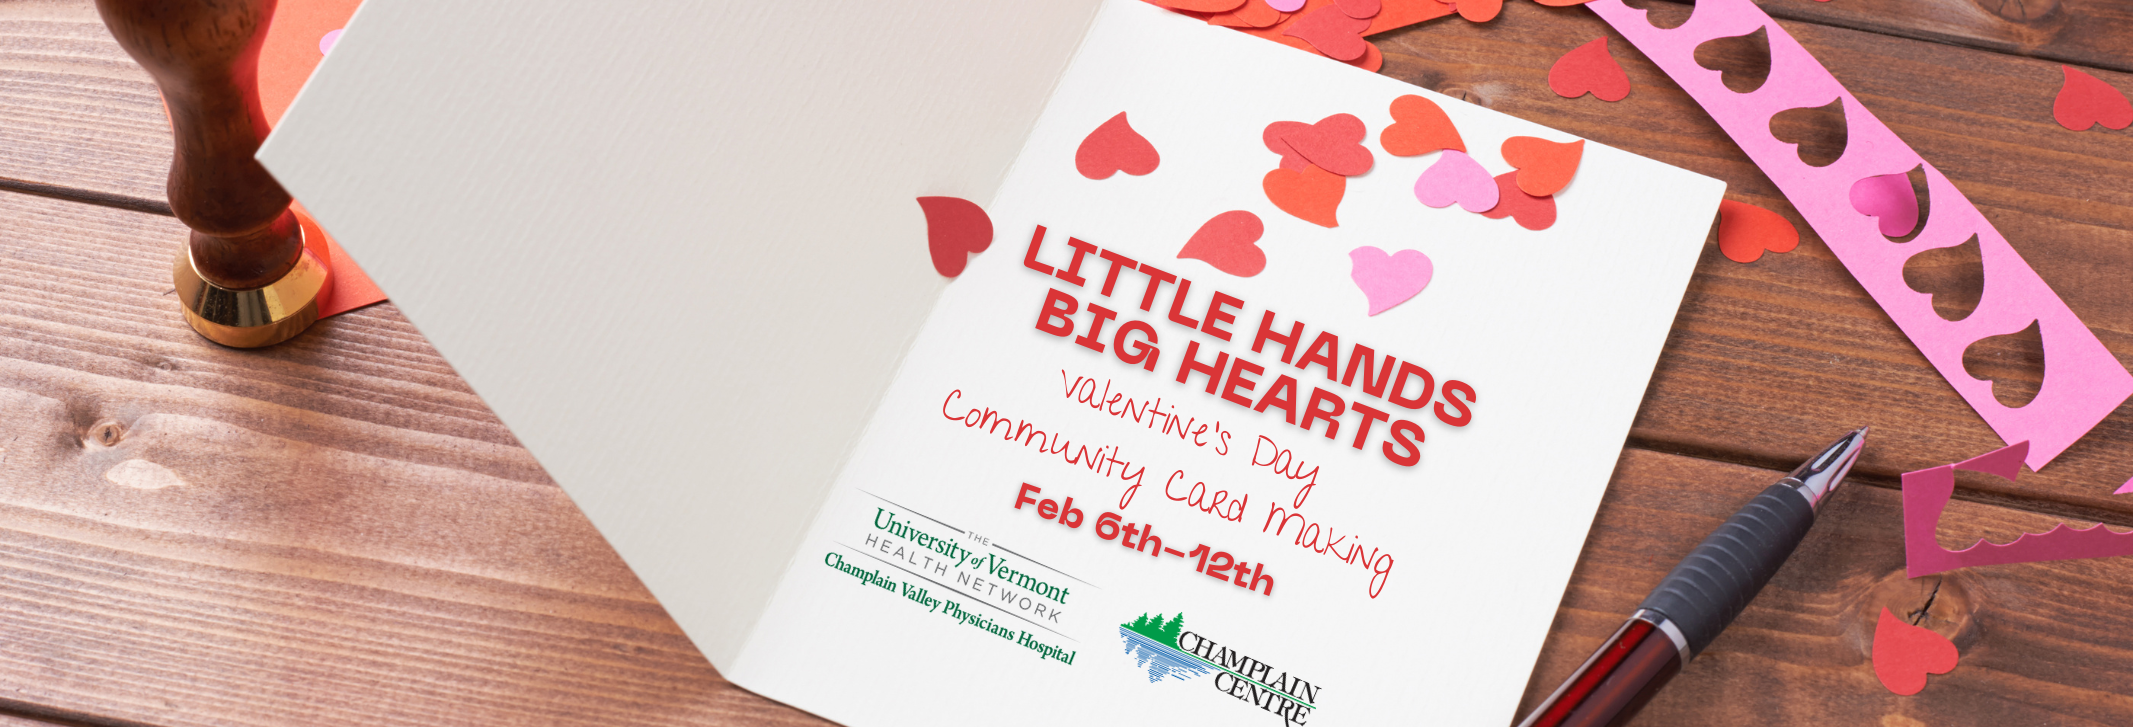 valentines Day community card making event image